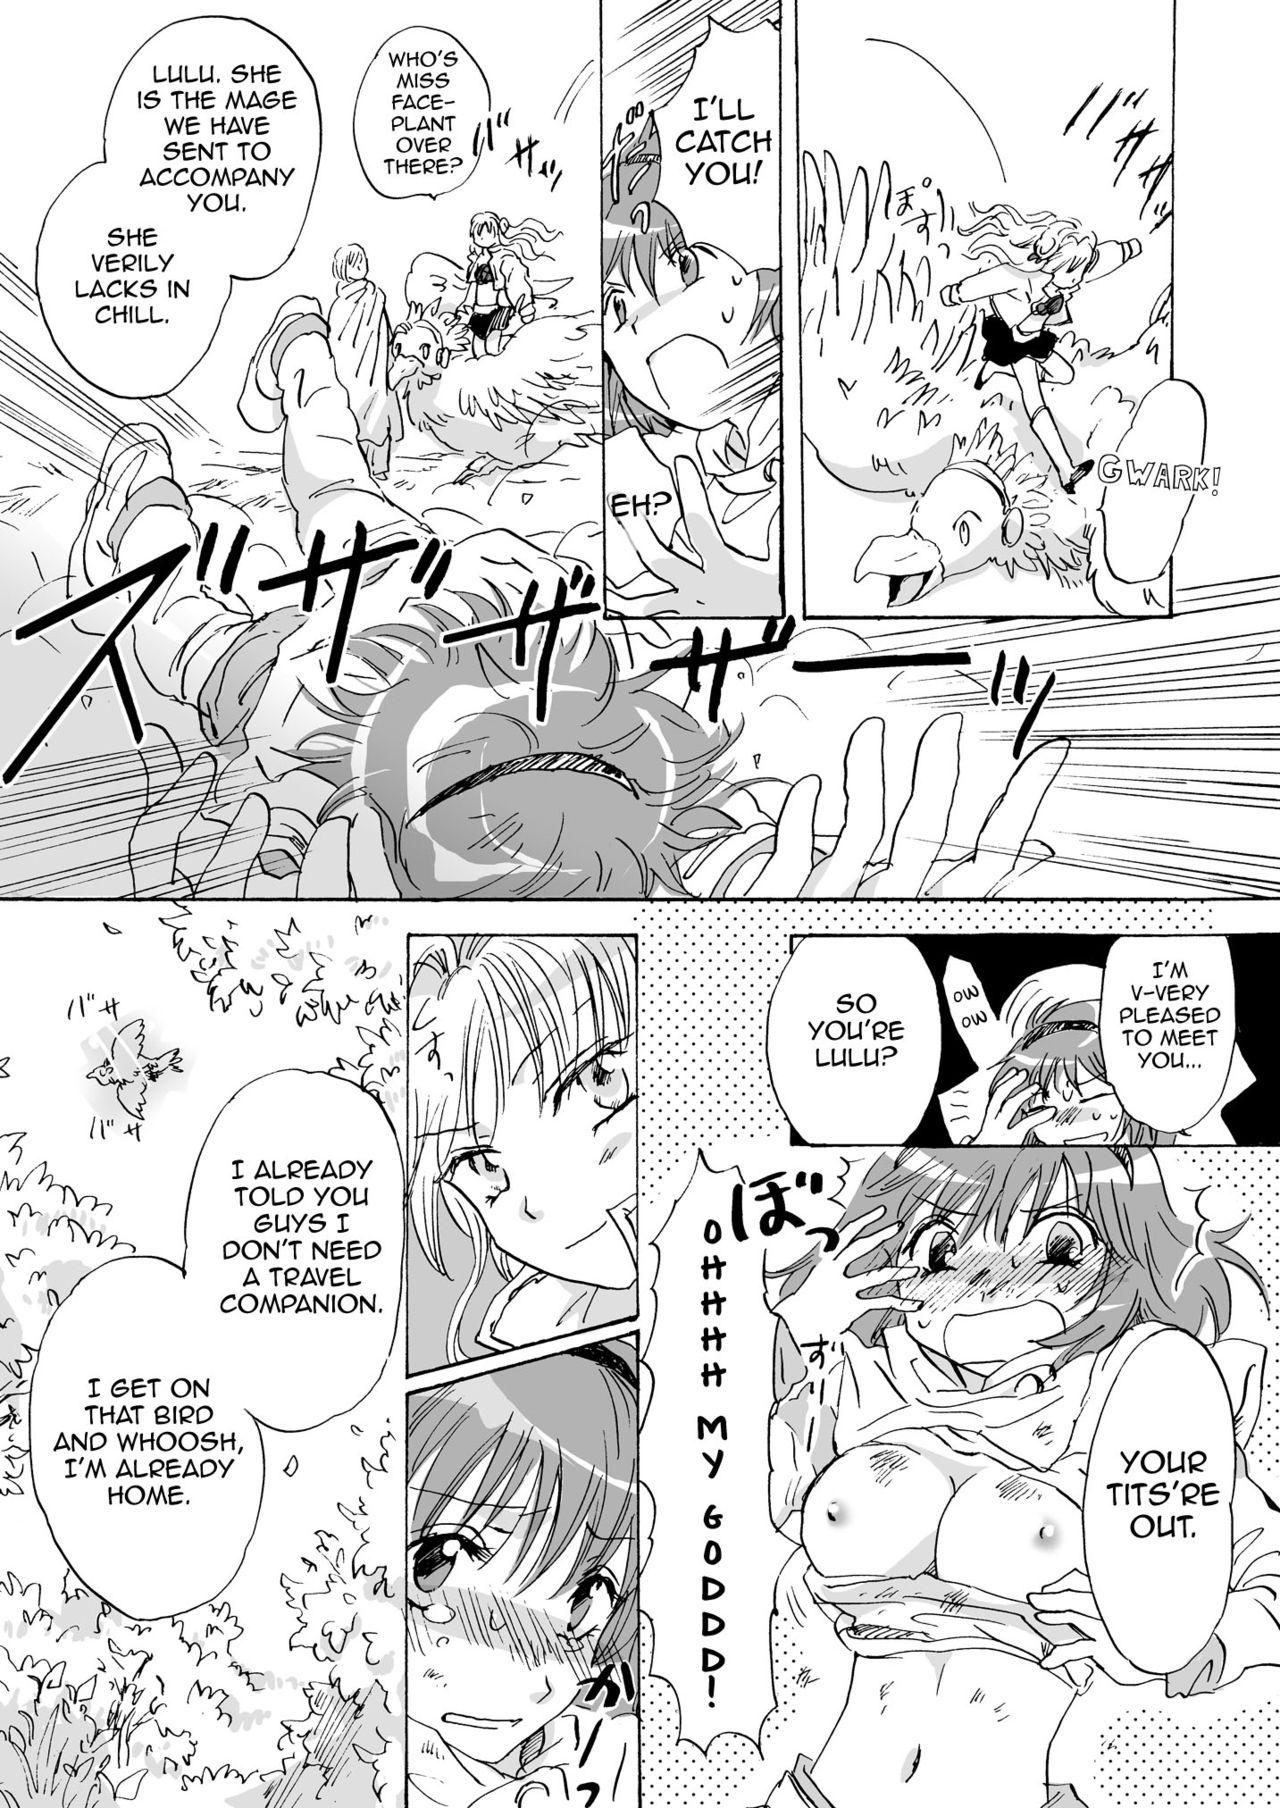 Young Tits Cutie Beast Complete Edition Ch. 1-4 Interacial - Page 9